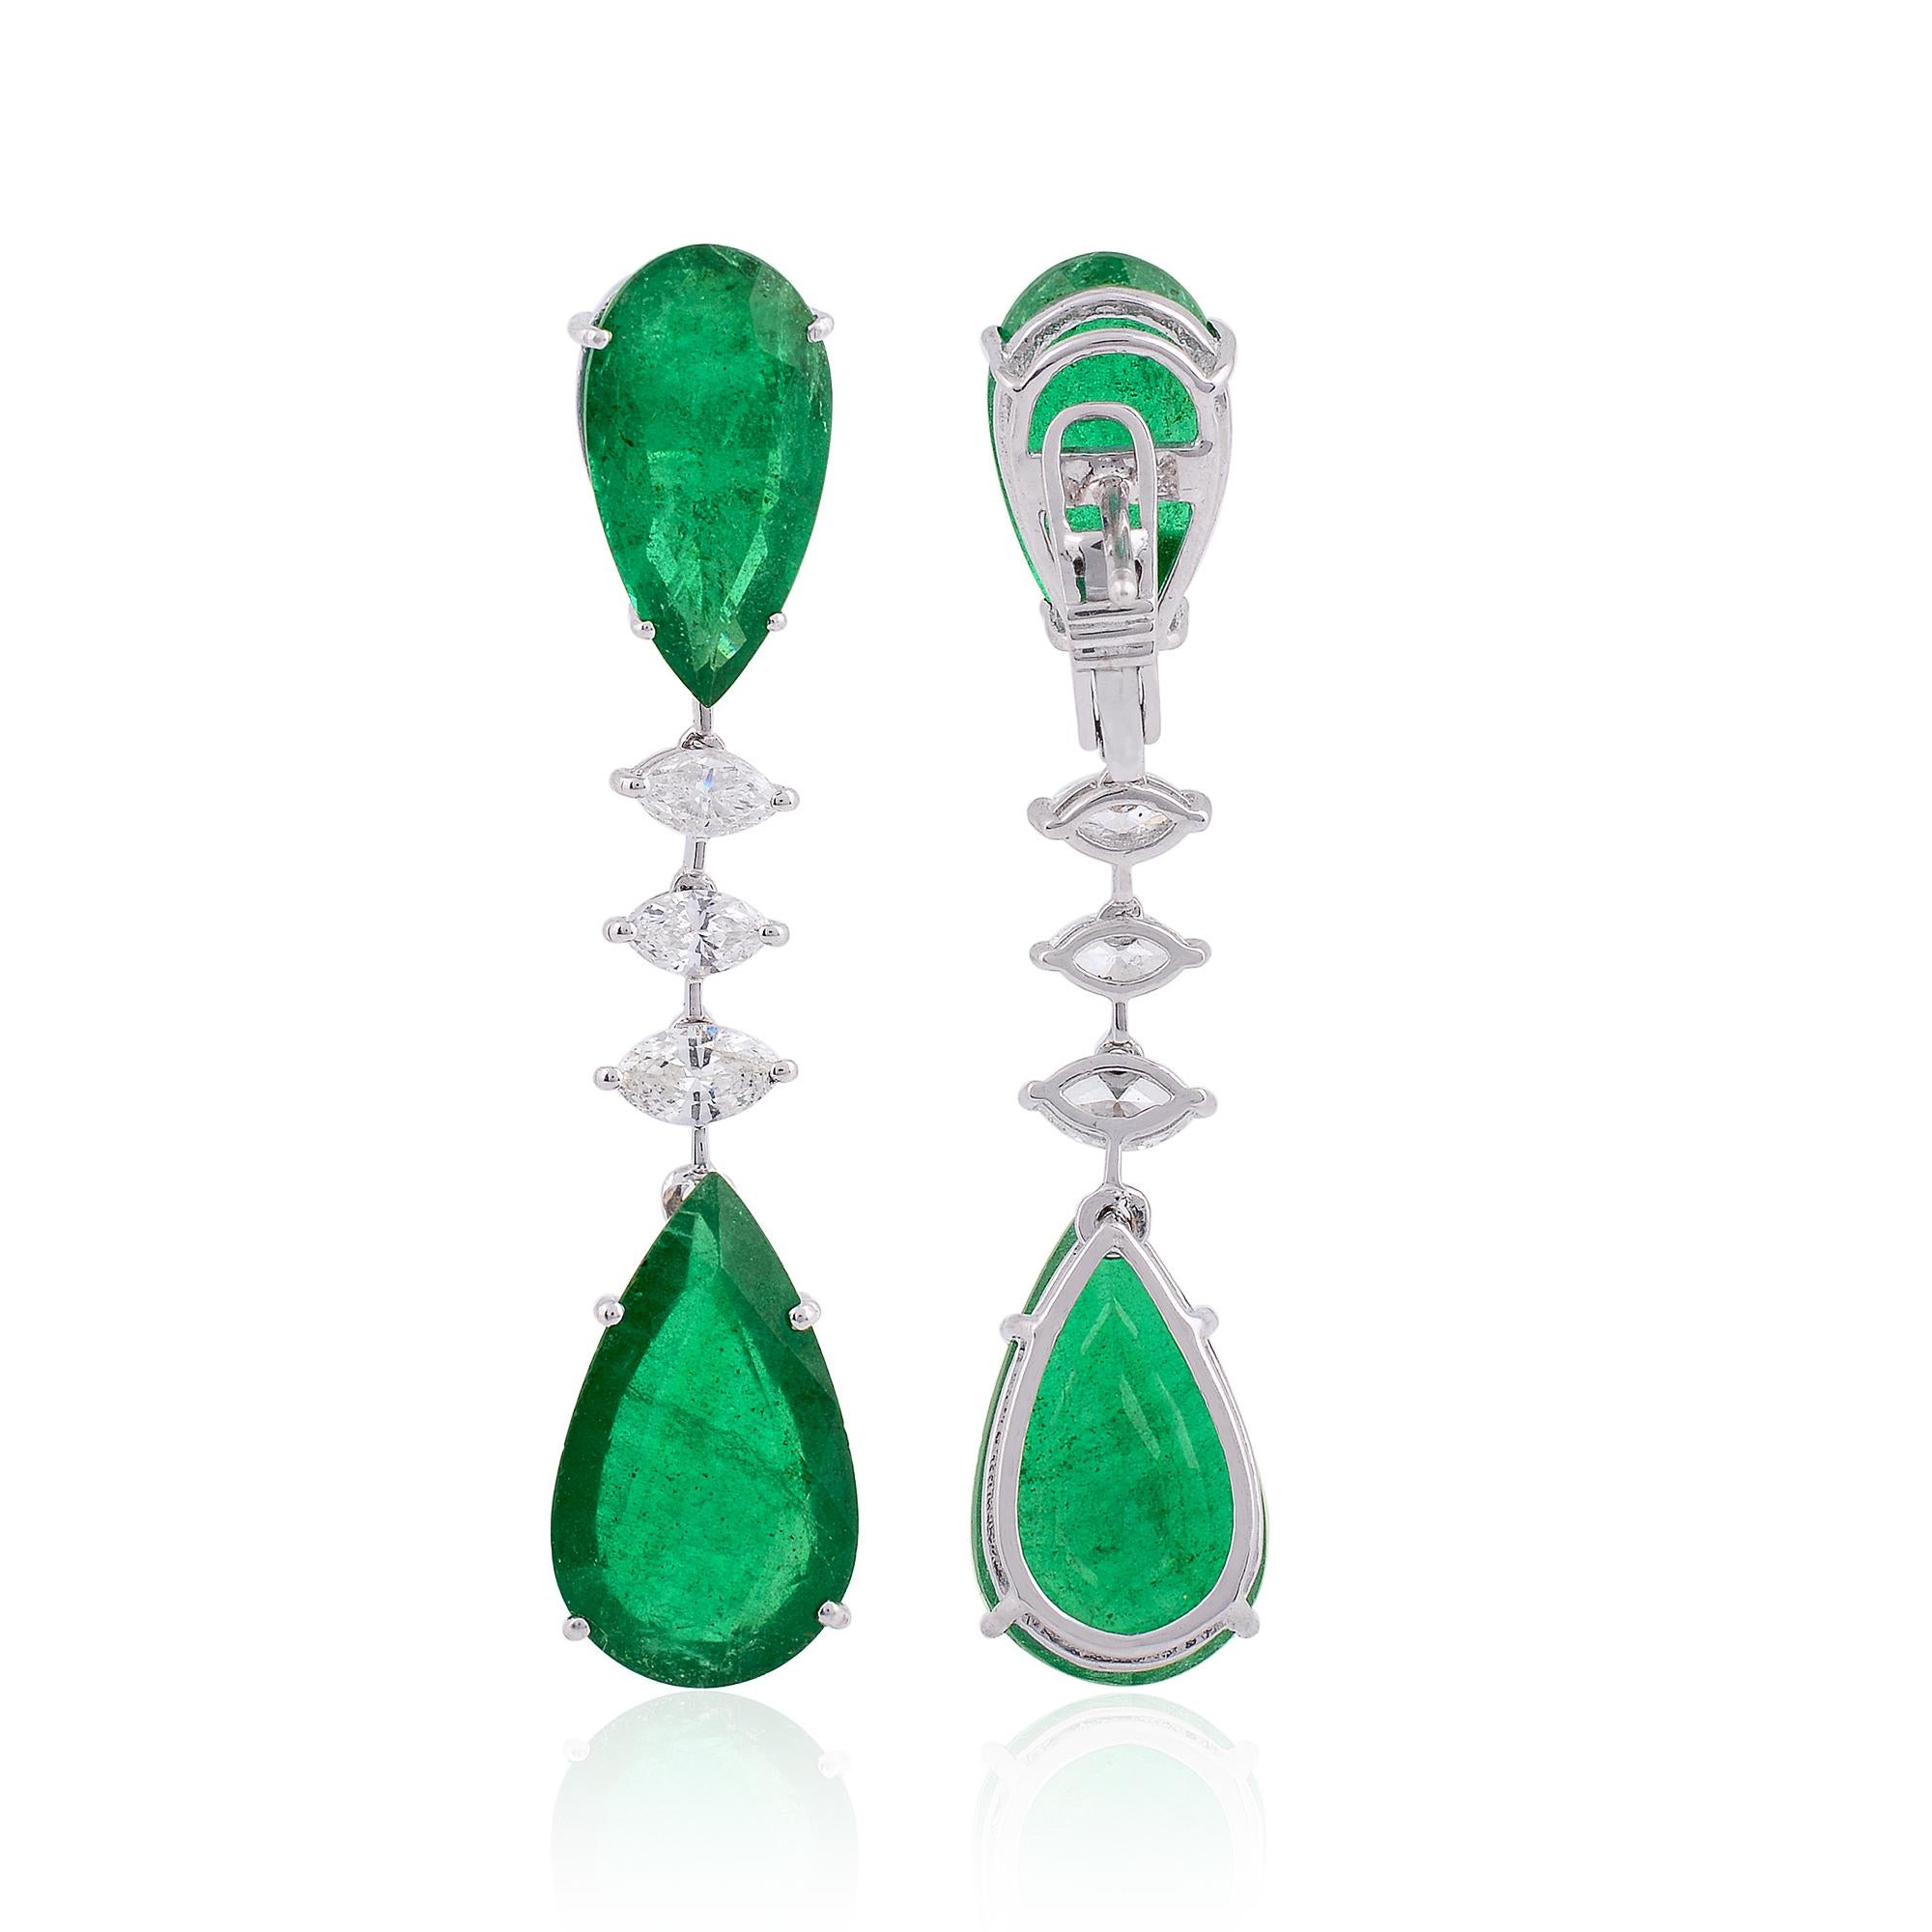 Item Code :- SEE-1351A
Gross Weight :- 10.53 gm
14k Solid White Gold Weight :- 6.17 gm
Natural Diamond Weight :- 1.31 carat  ( AVERAGE DIAMOND CLARITY SI1-SI2 & COLOR H-I )
Emerald Weight :- 20.49 carat
Earrings Size :- 50 mm approx. 

✦